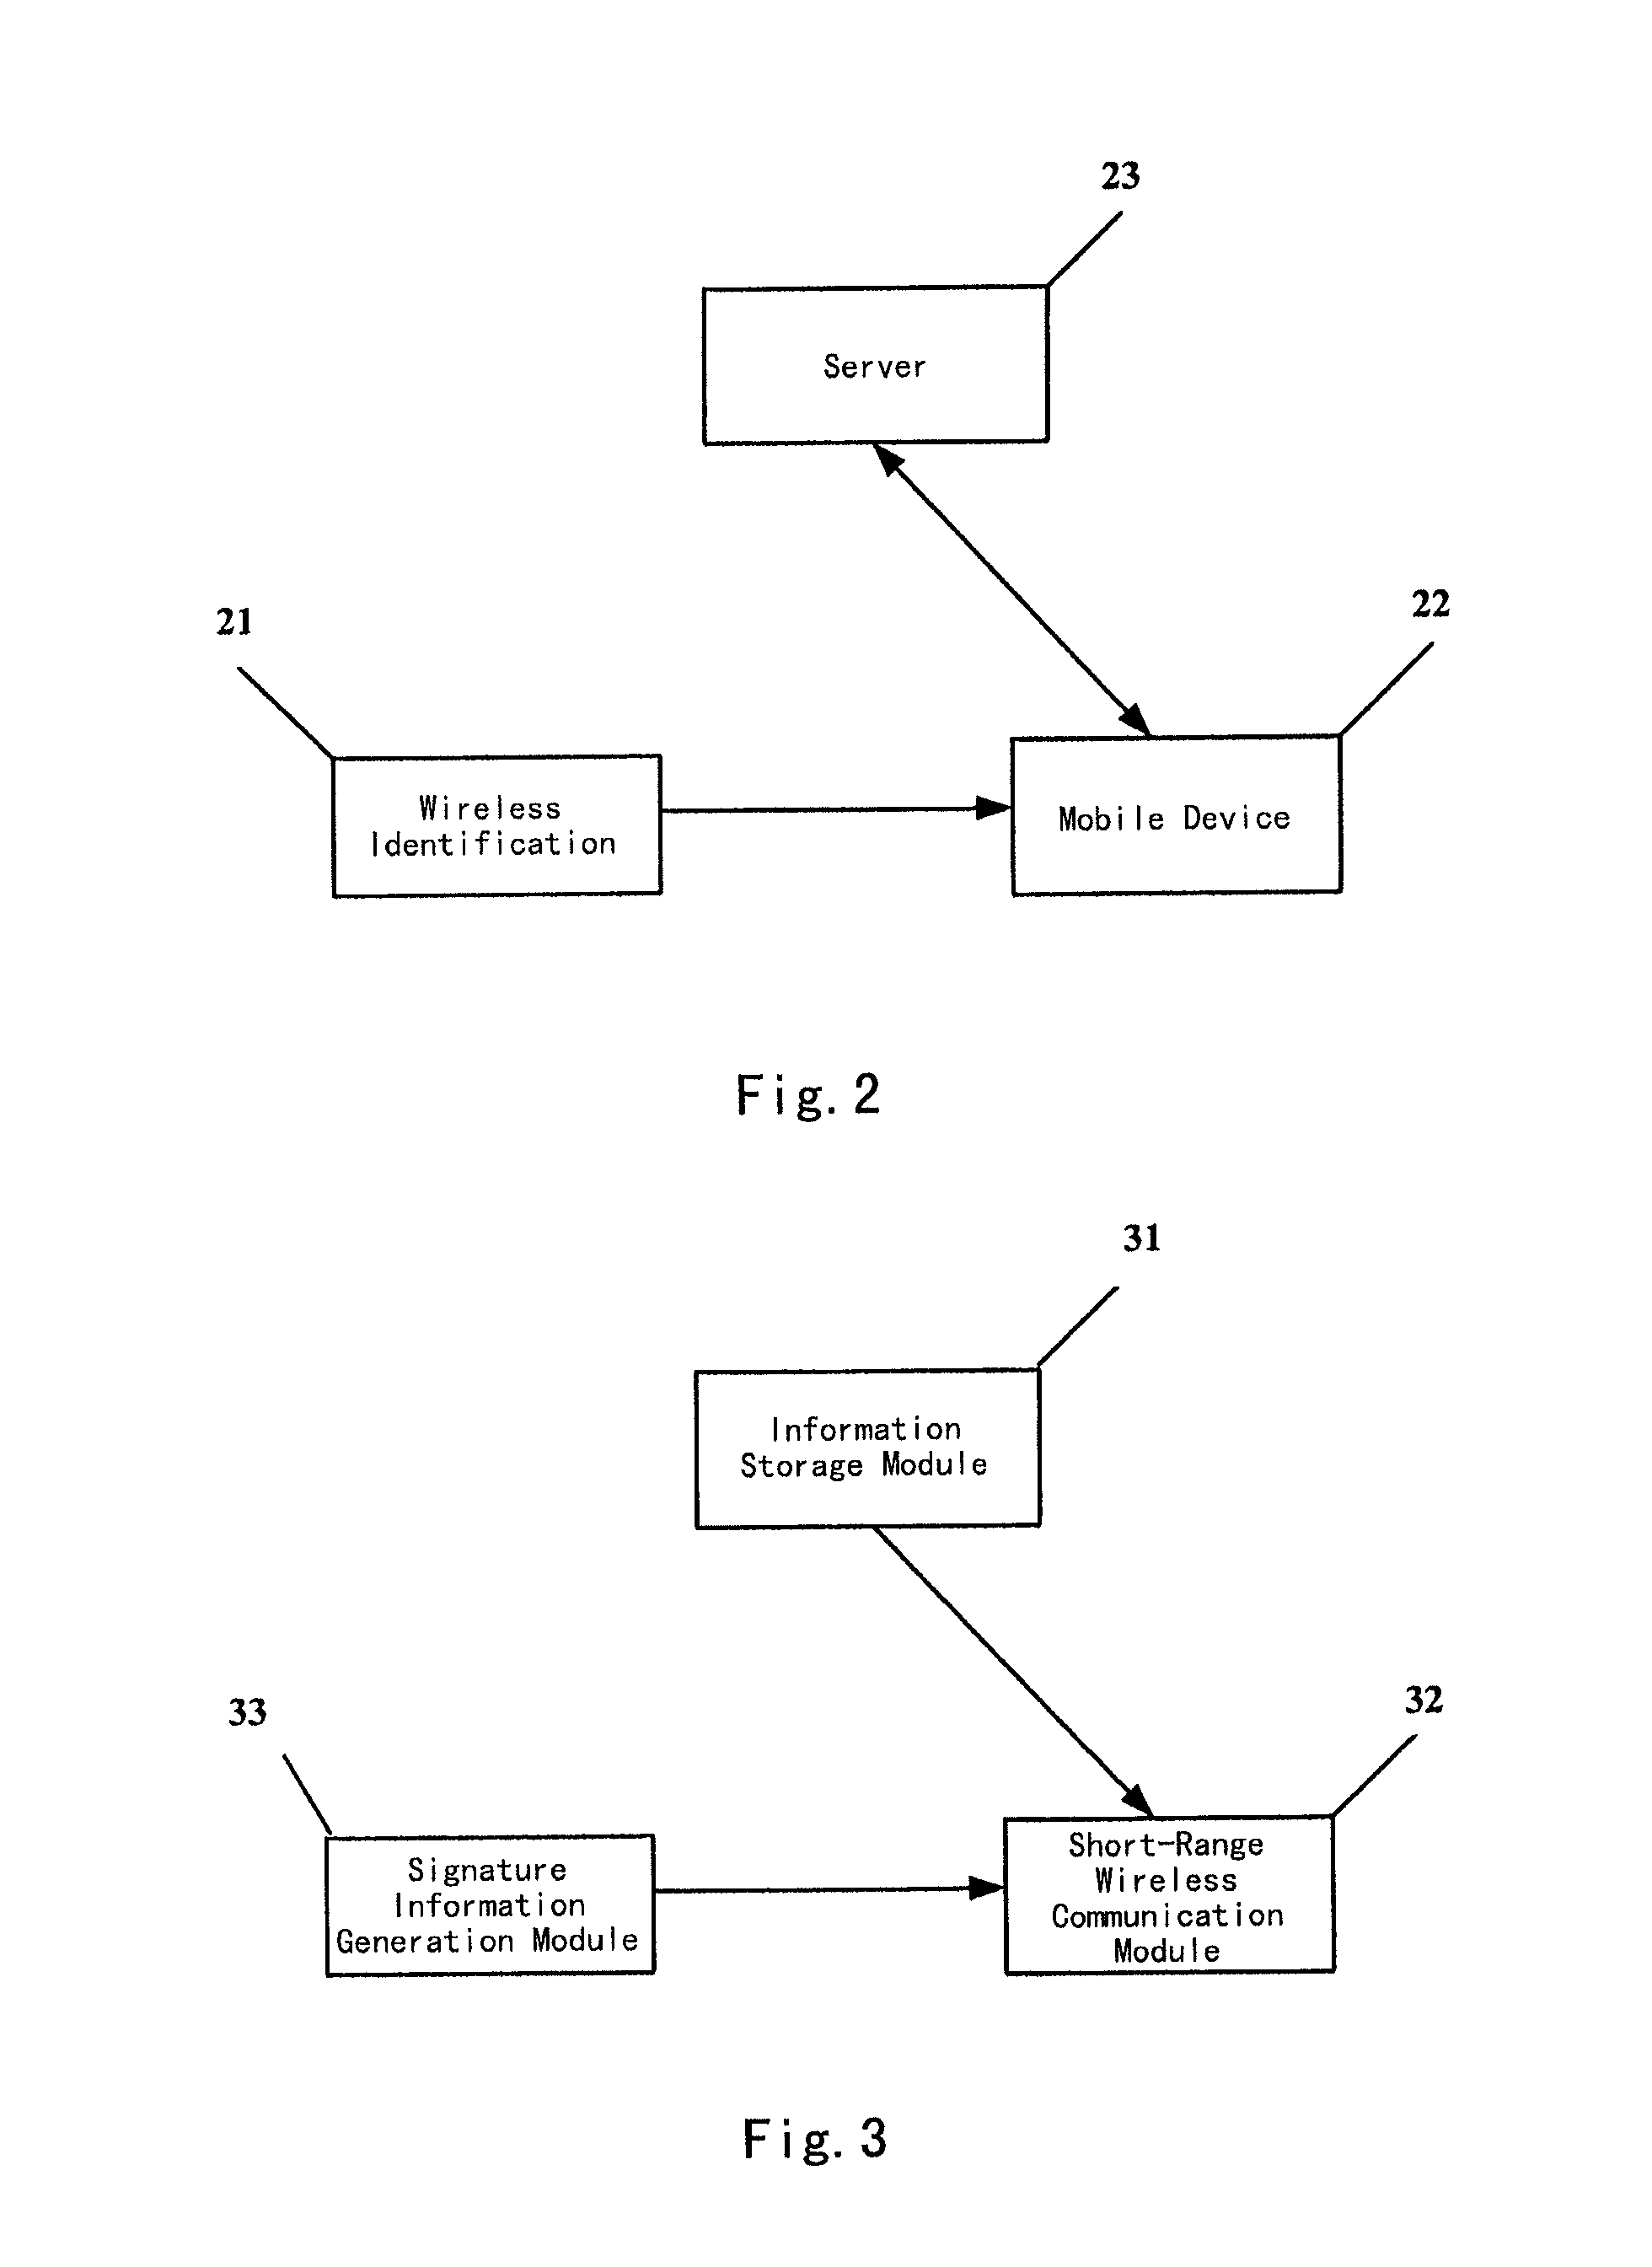 Method and system for authentication based on wireless identification, wireless identification and server